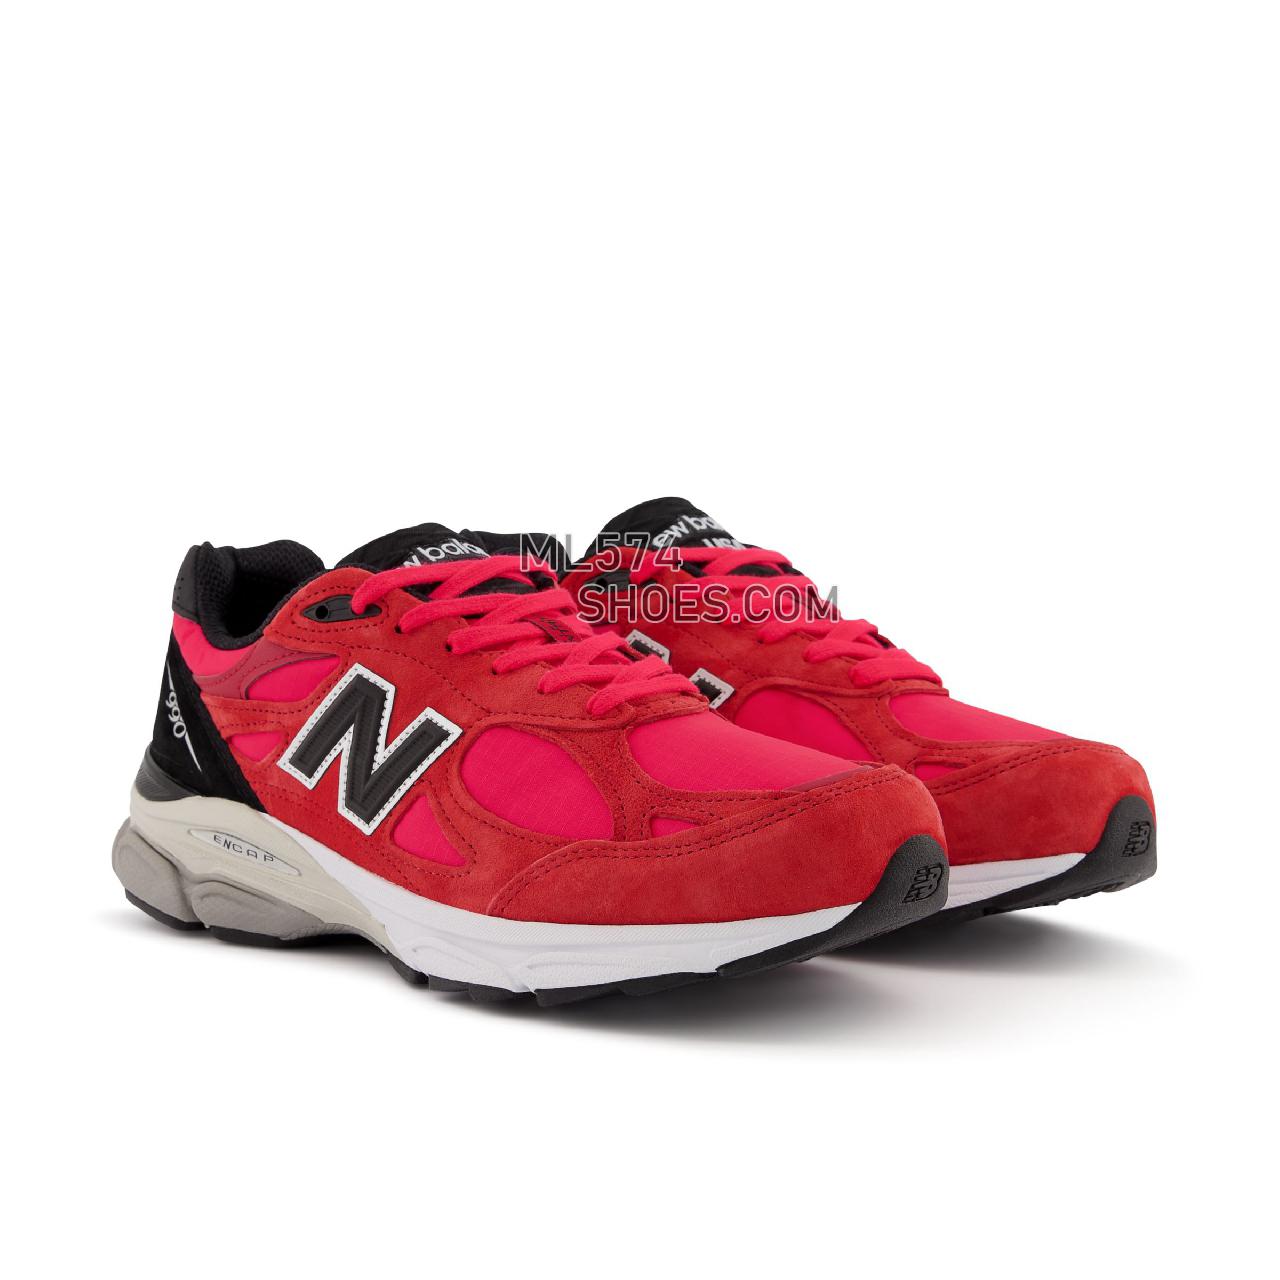 New Balance Made in USA 990v3 - Men's Made in USA And UK Sneakers - Red with Black - M990PL3